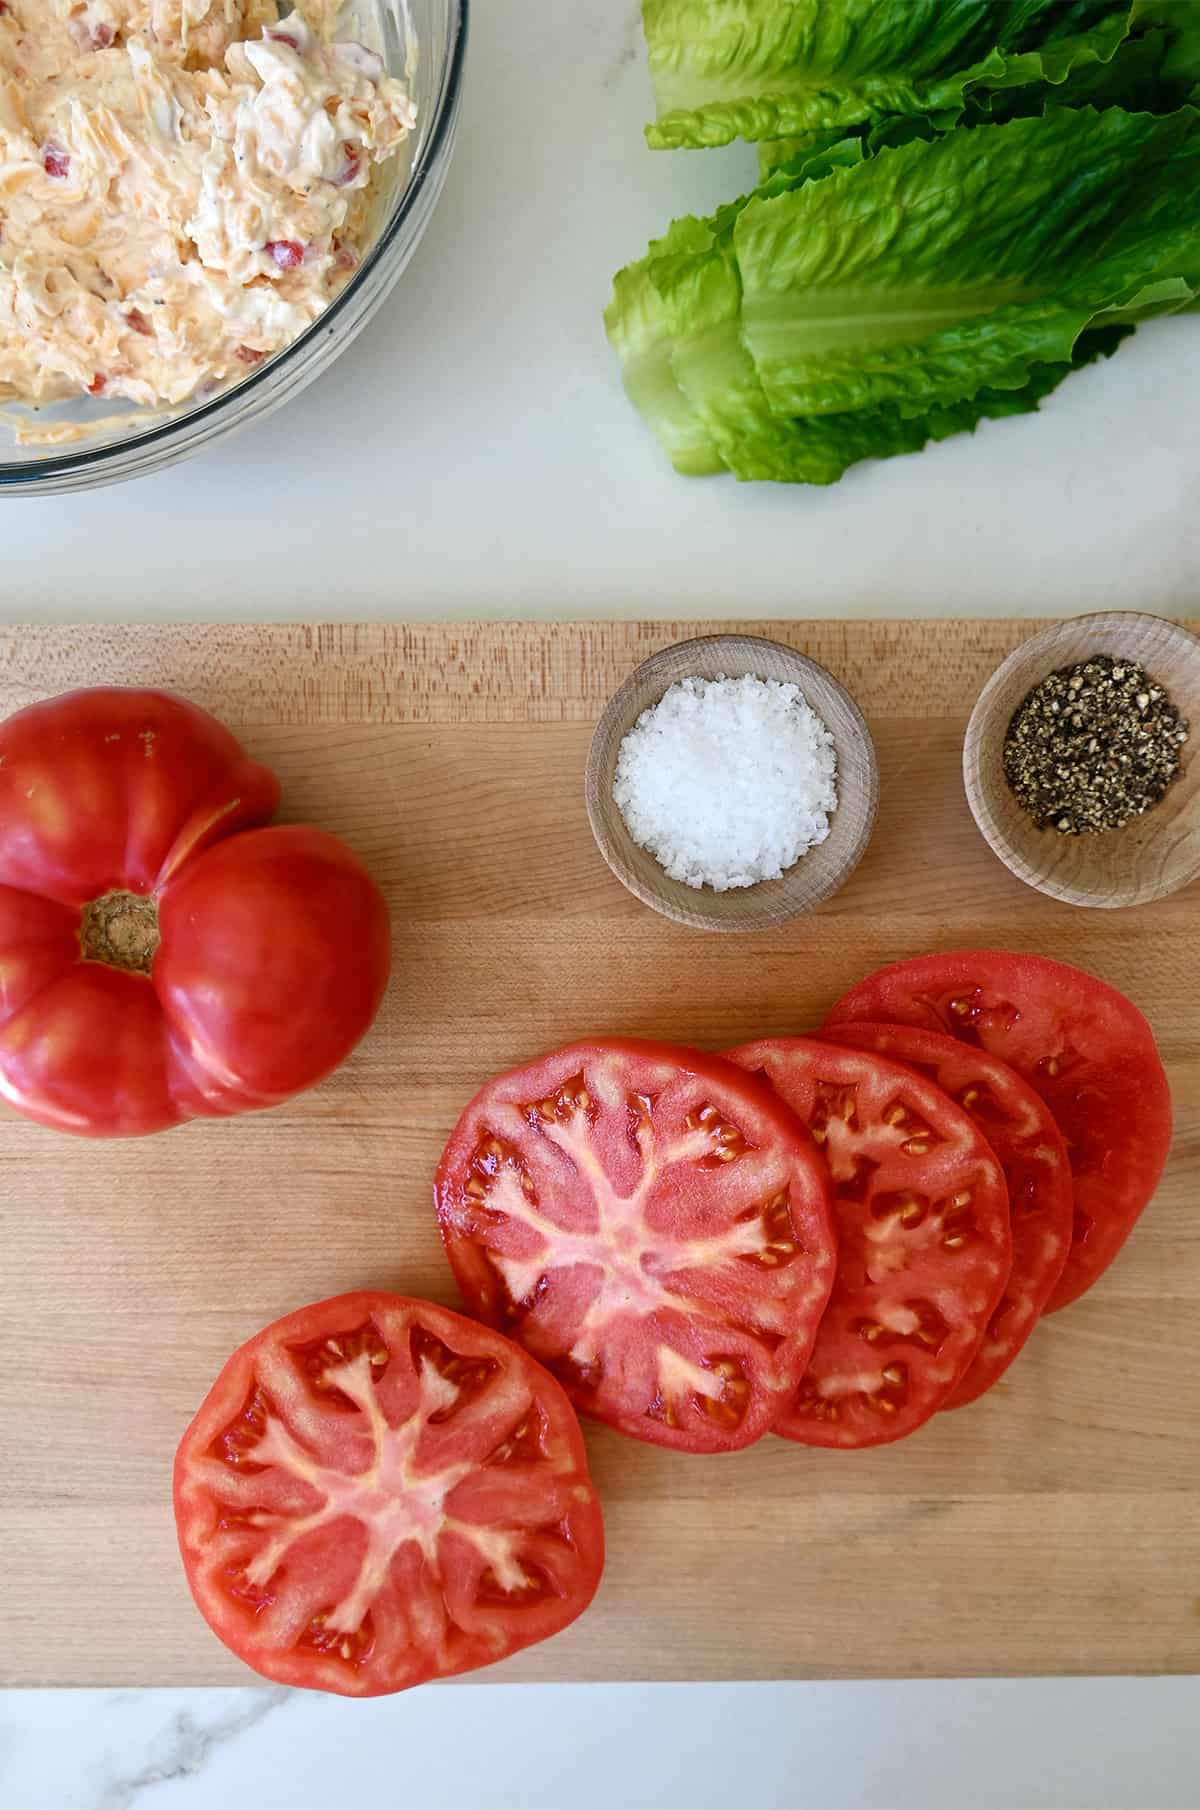 Five slices of tomato next to a whole beefsteak tomato and small bowls containing salt and pepper on a wood cutting board.